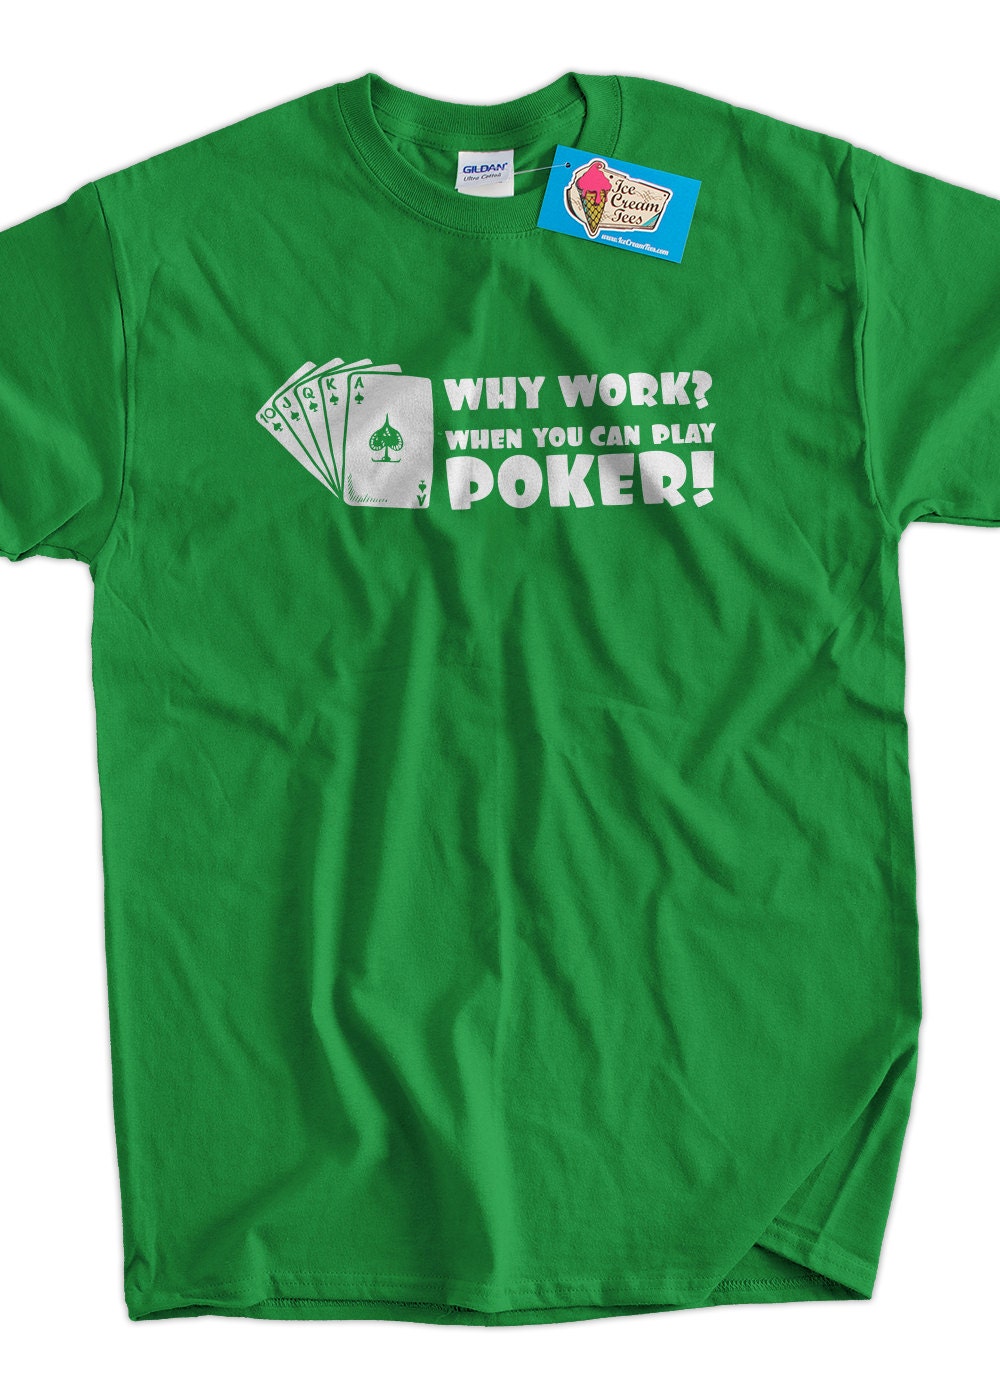 Work When Can Play Poker Screen Printed T-shirt Tee - Etsy